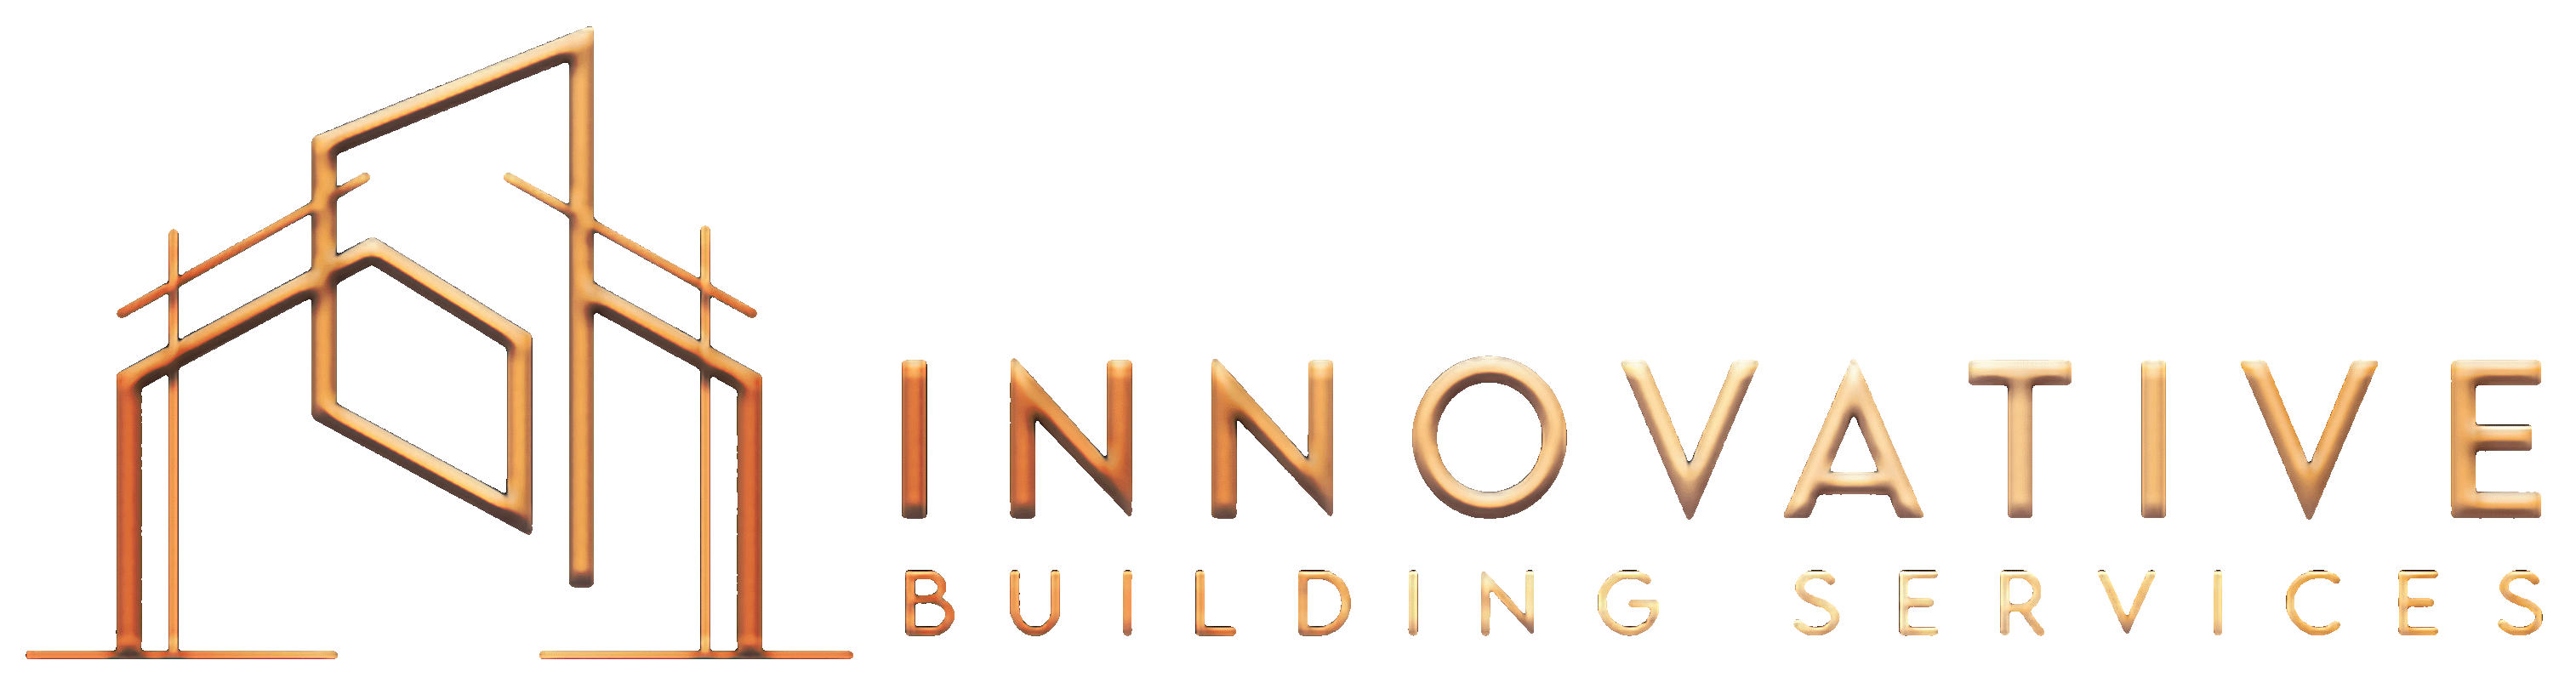 Innovative-Building-Services-logo.png